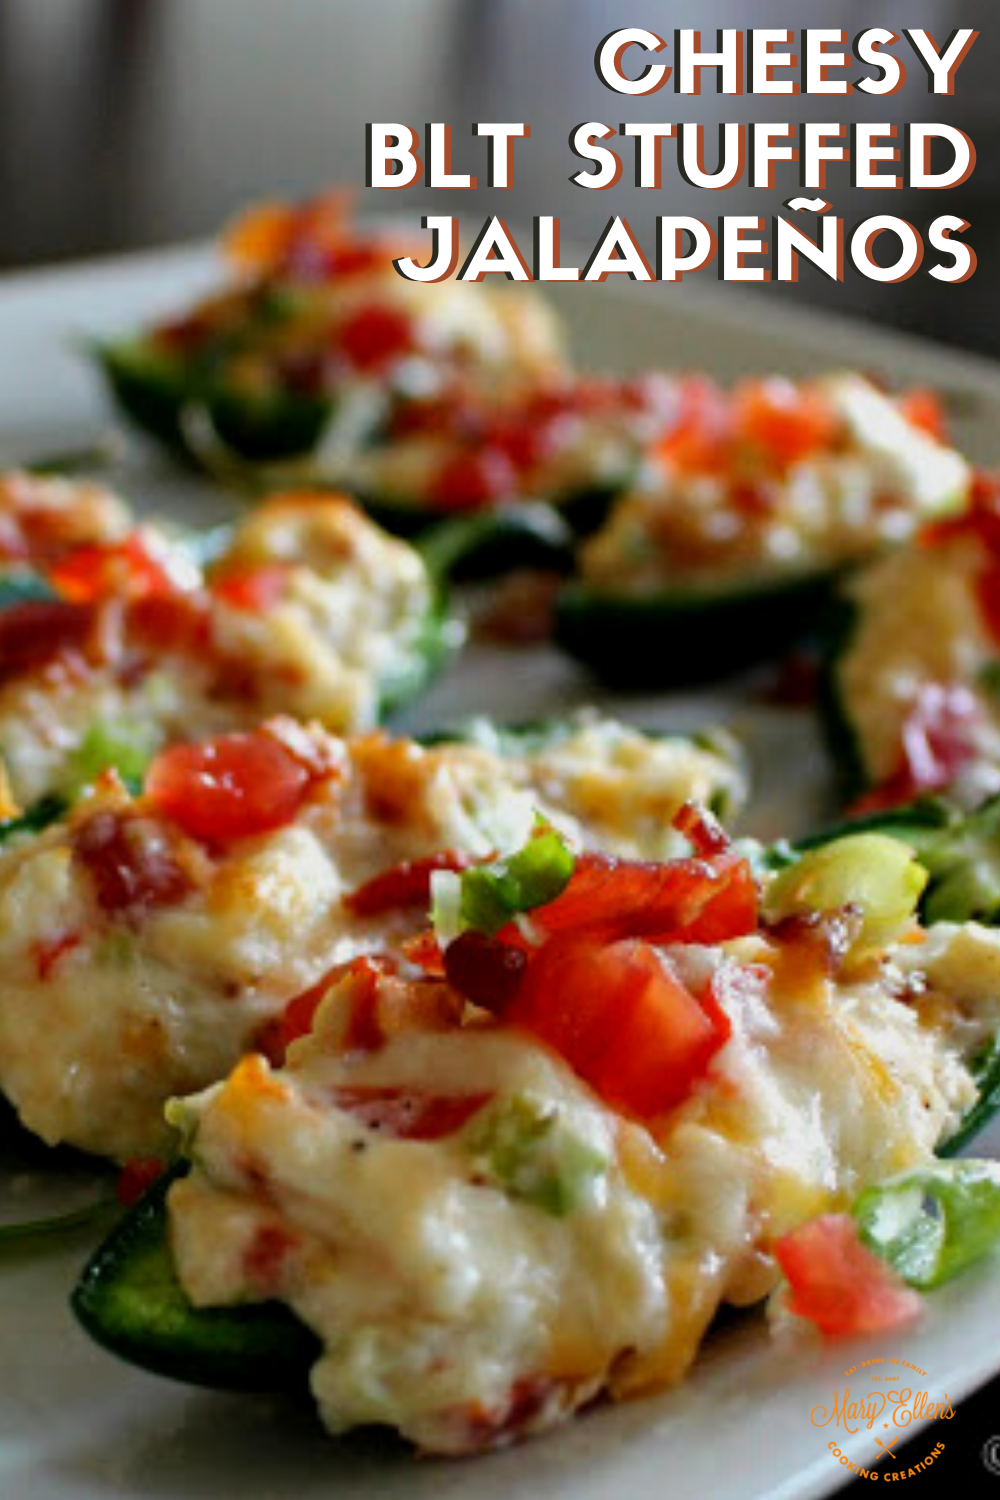 Mary Ellen's Cooking Creations: Cheesy BLT Stuffed Jalapenos